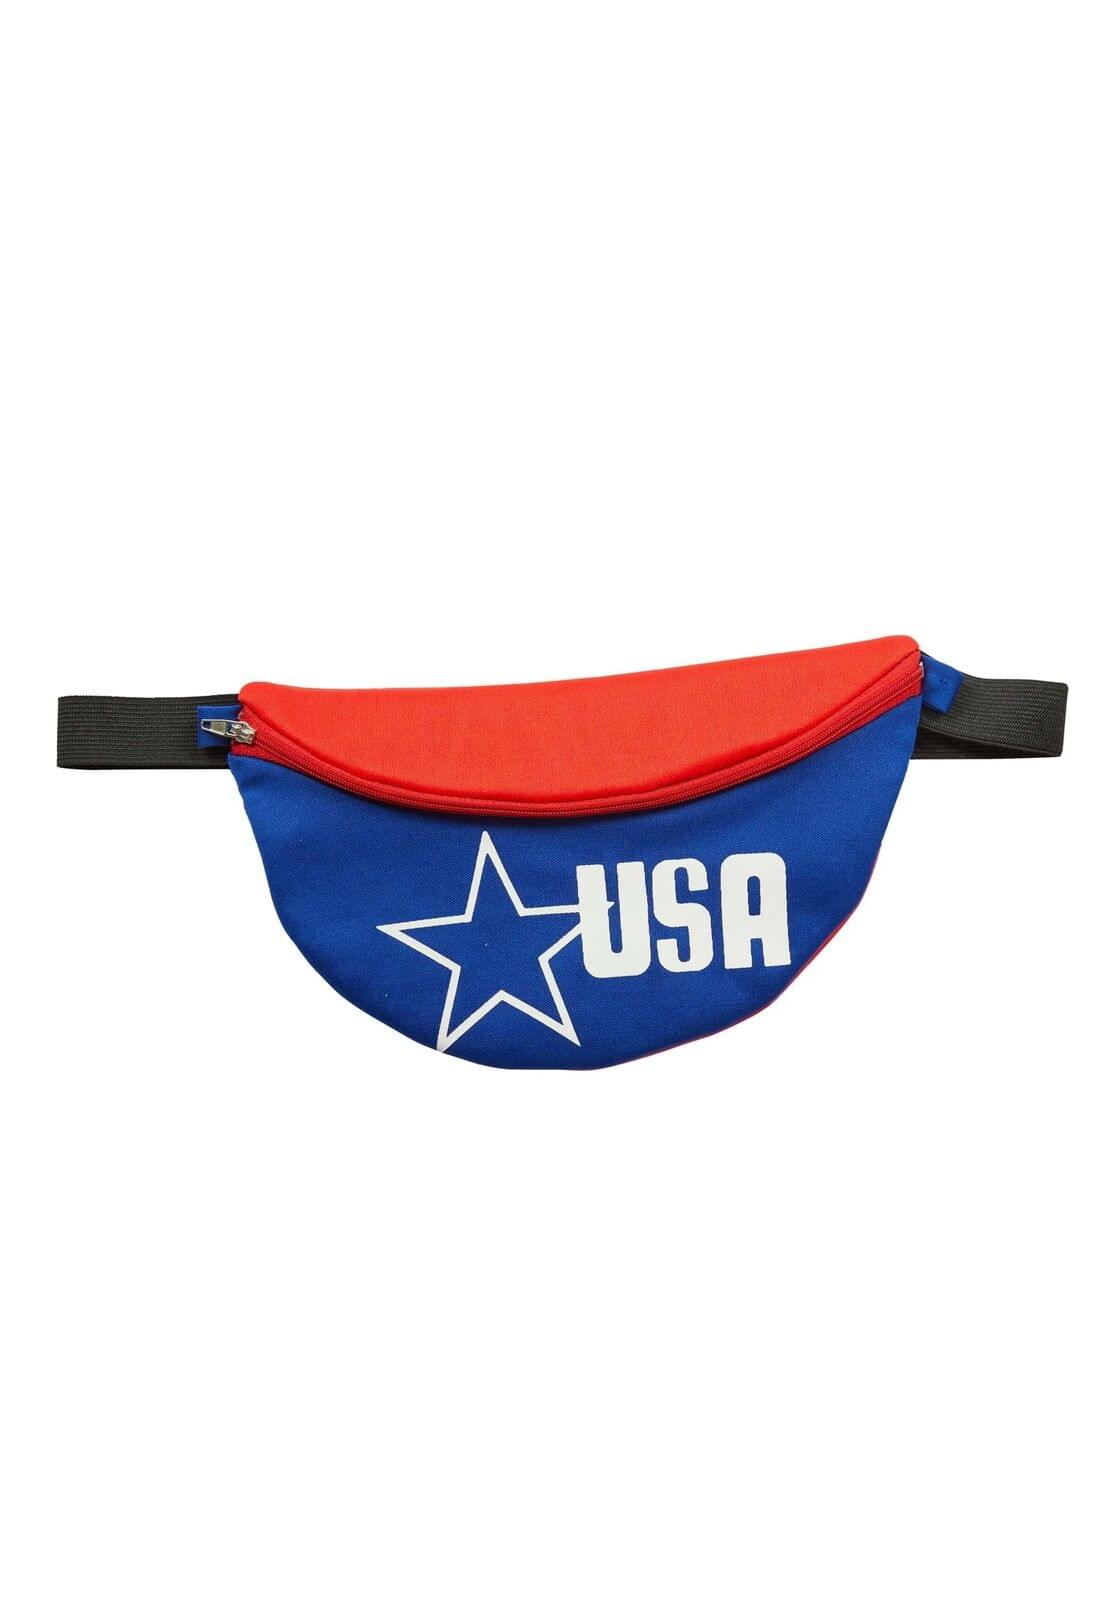 USA Fanny Pack Adult Costume Accessory